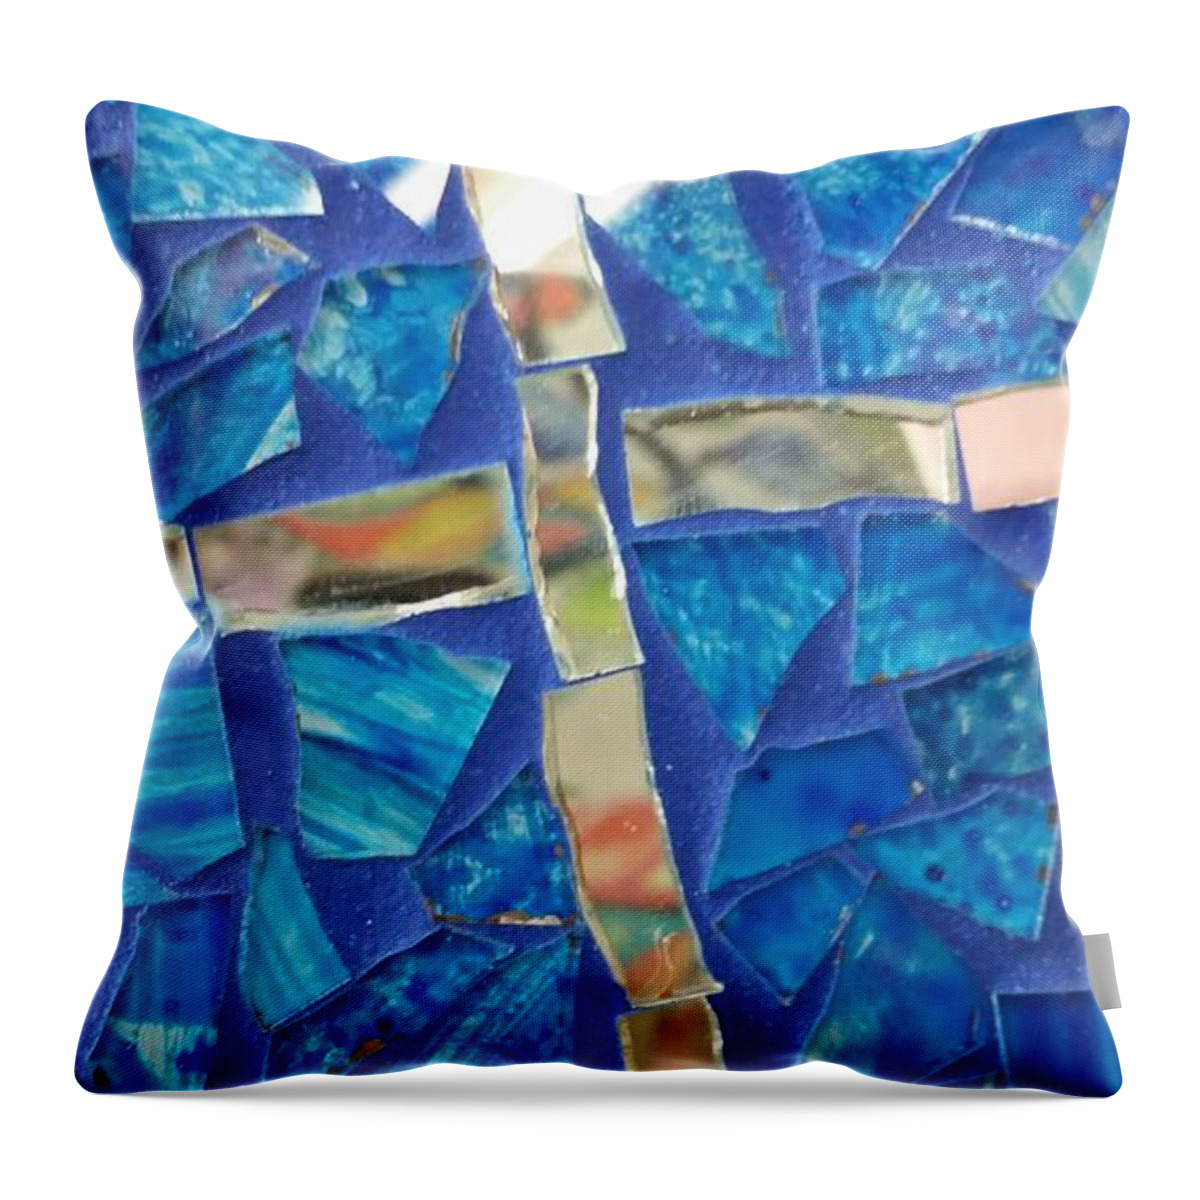  Abstract Reality Digital Imaging. Throw Pillow featuring the photograph Texture #22 by Scott S Baker